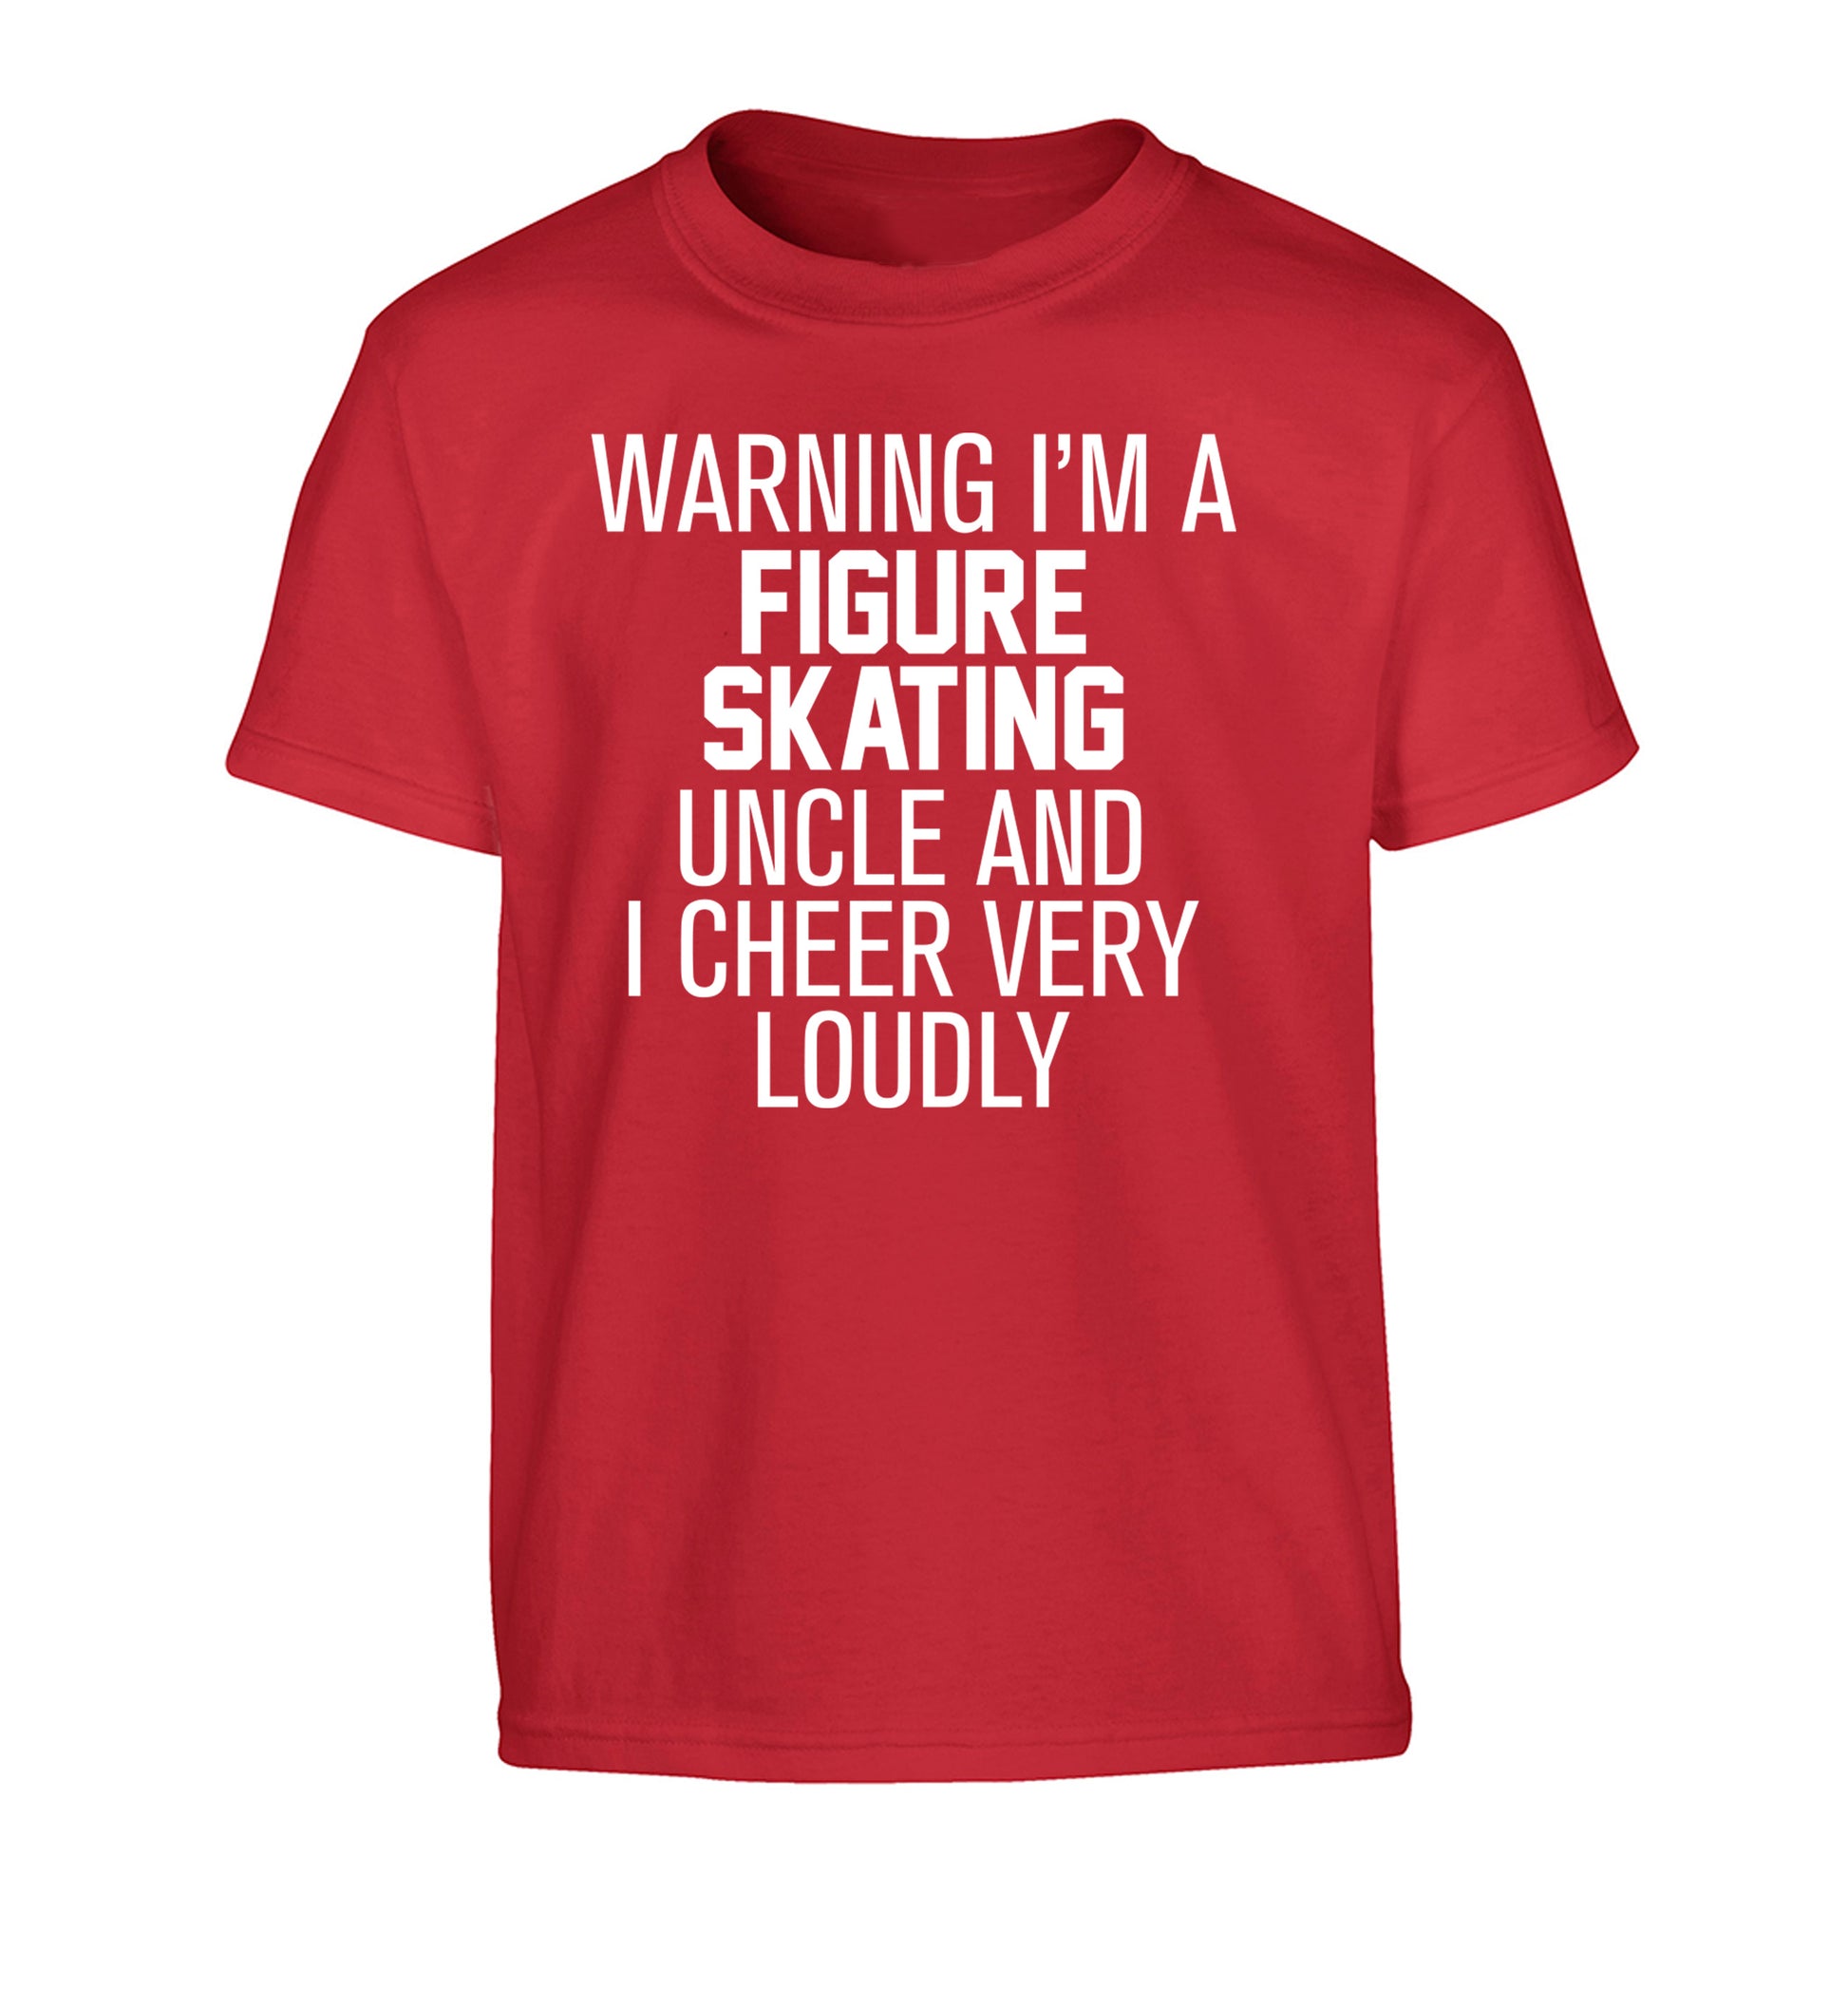 Warning I'm a figure skating uncle and I cheer very loudly Children's red Tshirt 12-14 Years